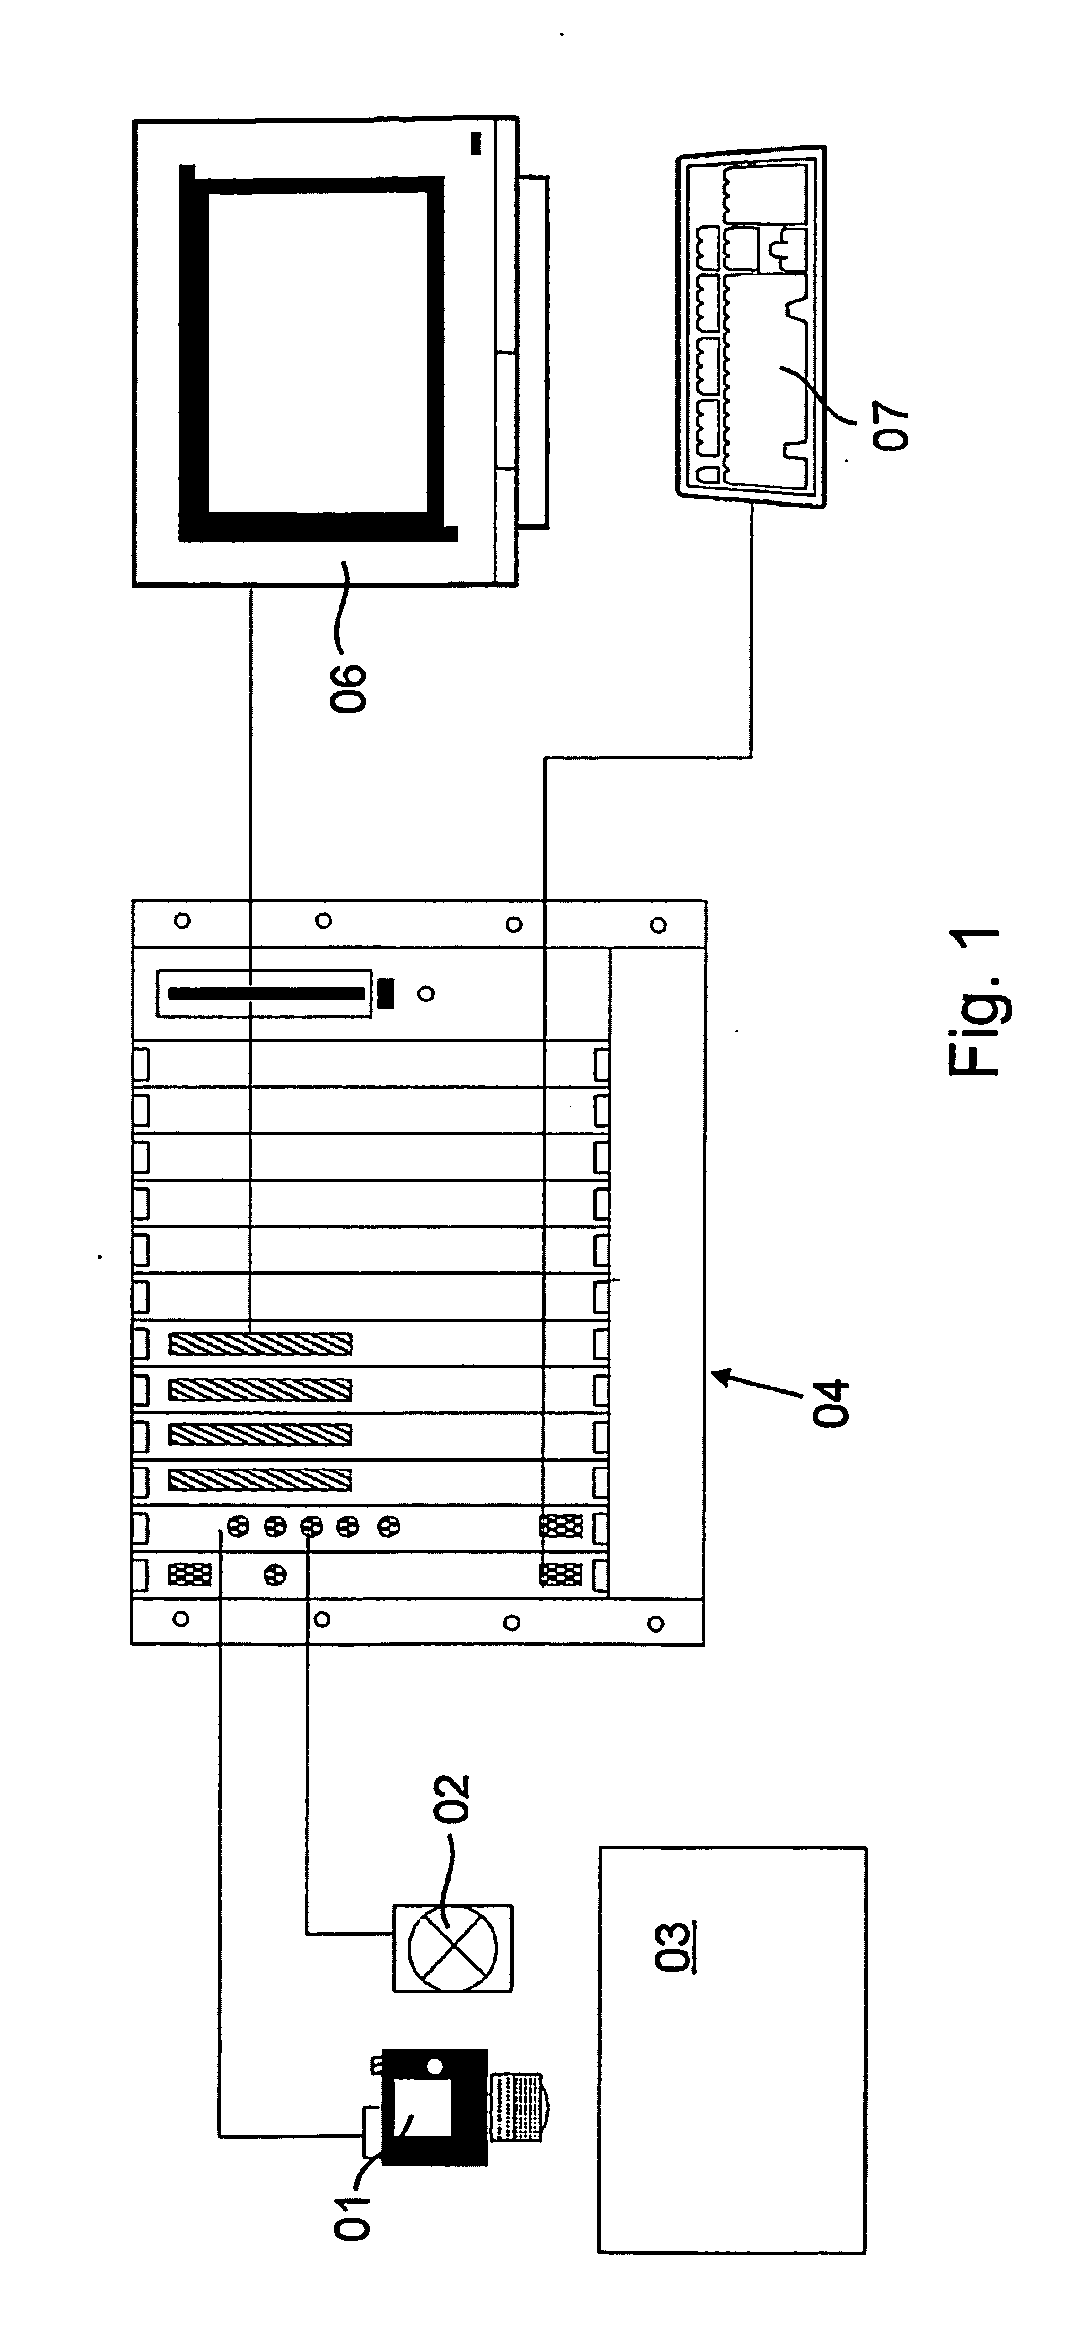 Method for Evaluating the Quality of a Printed Matter, Provided by a Printing Machine